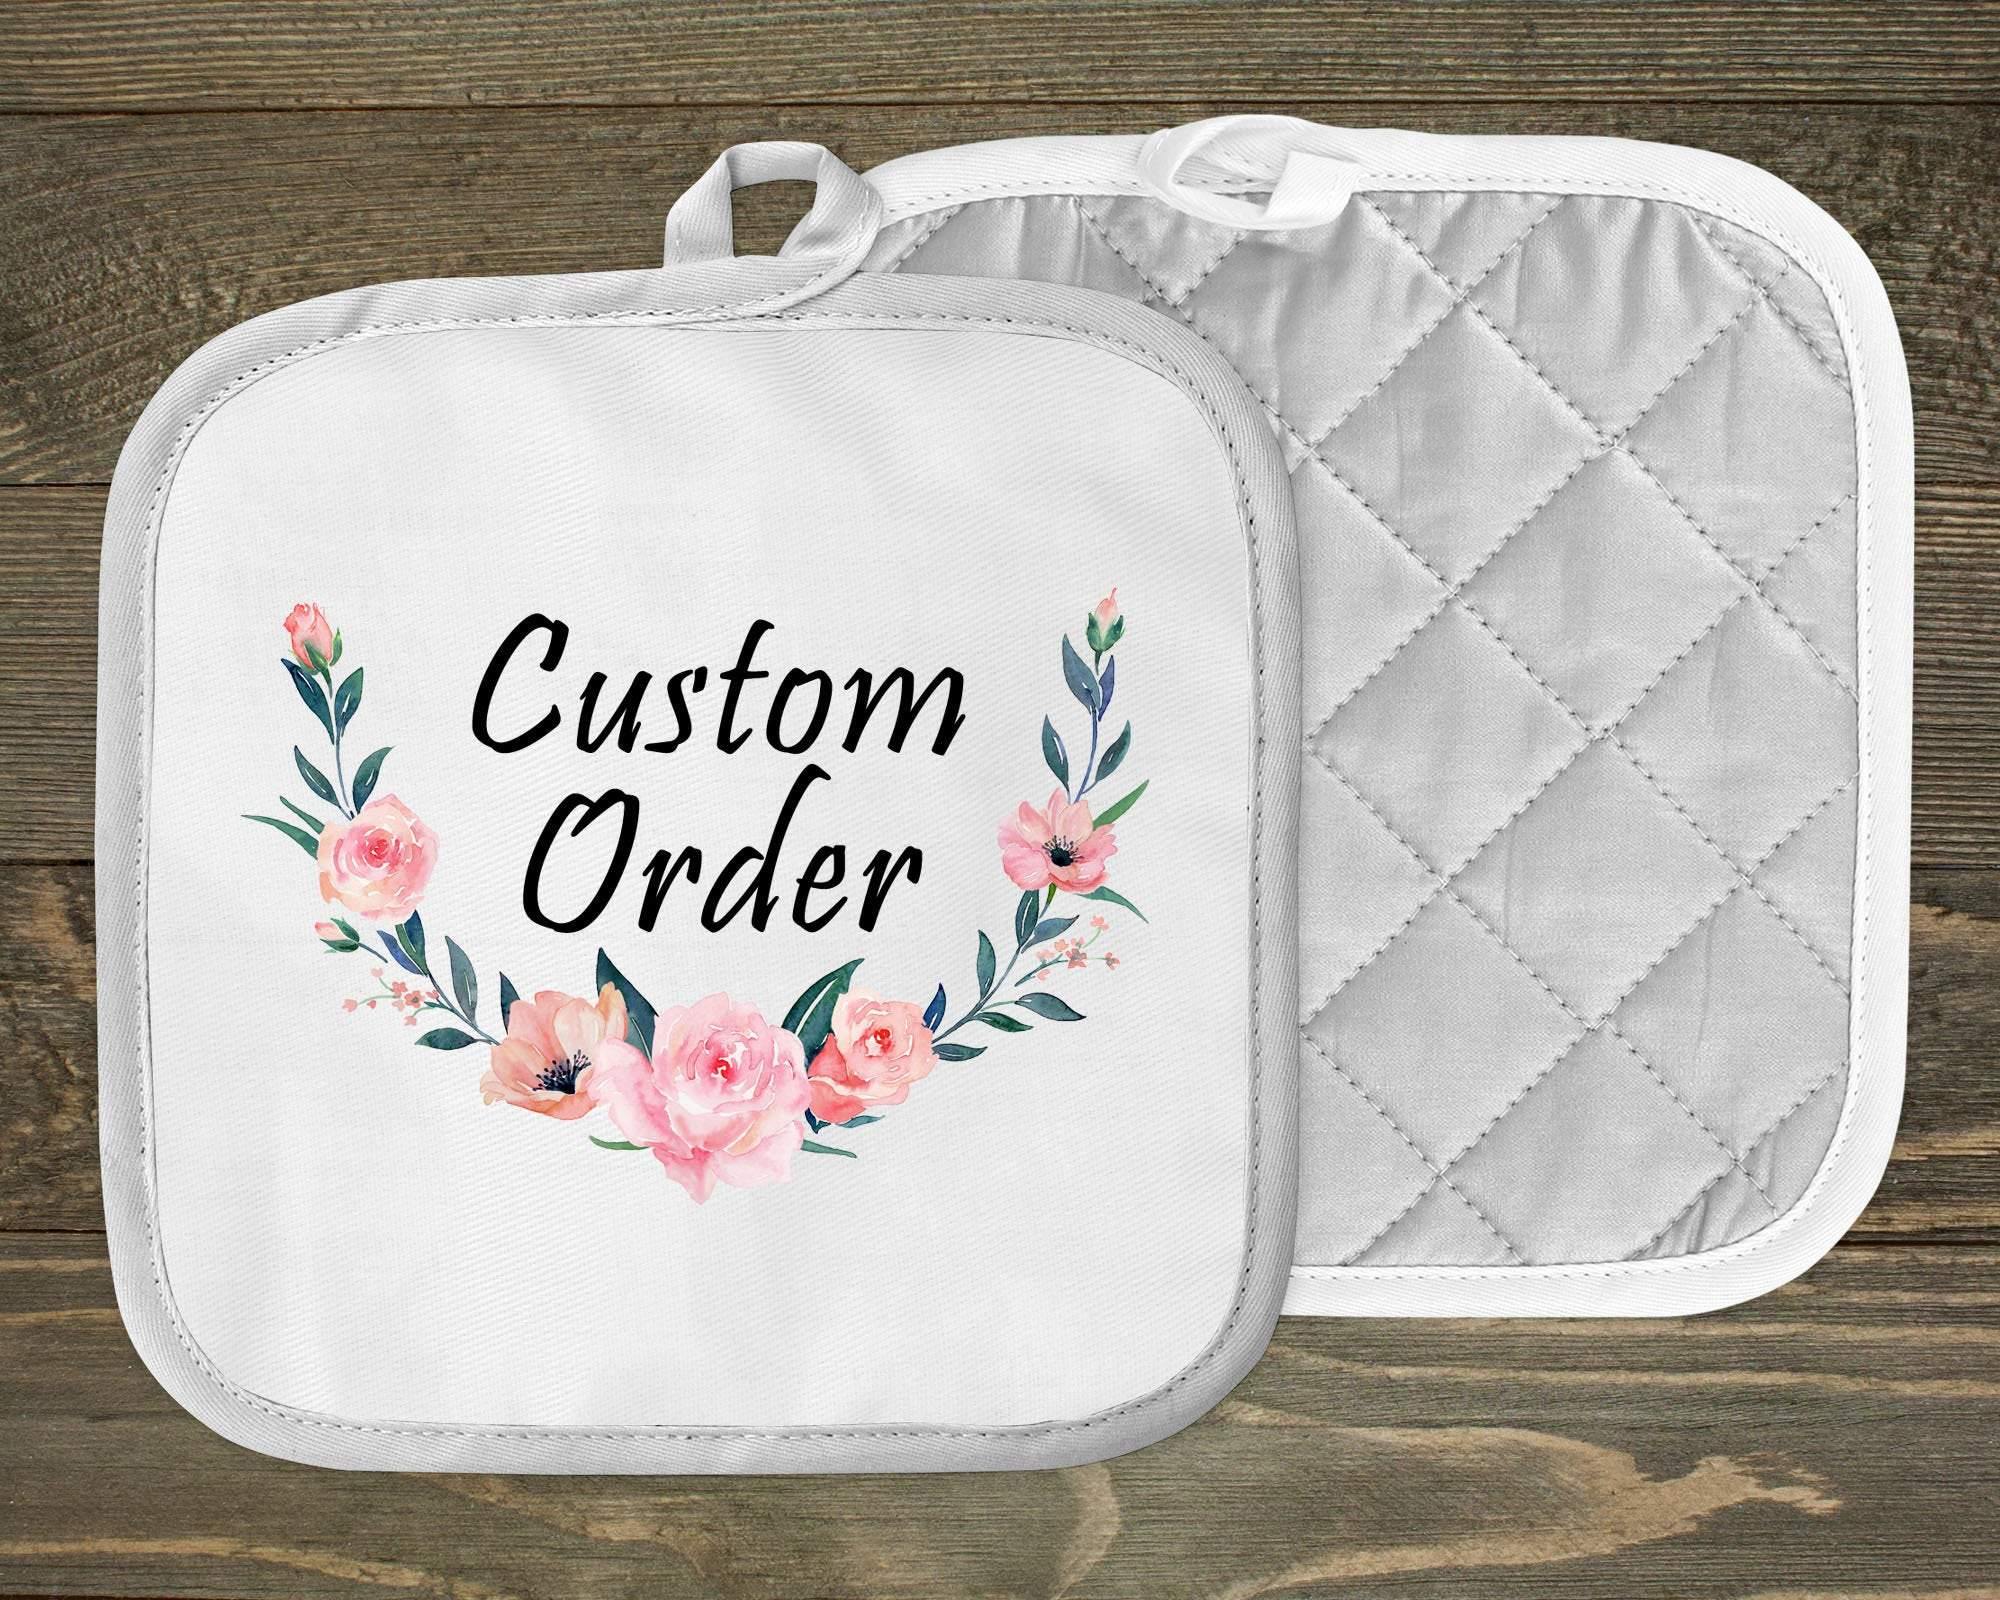 Personalized Pot Holders | Custom Kitchen Decor | Custom Order - This & That Solutions - Personalized Pot Holders | Custom Kitchen Decor | Custom Order - Personalized Gifts & Custom Home Decor